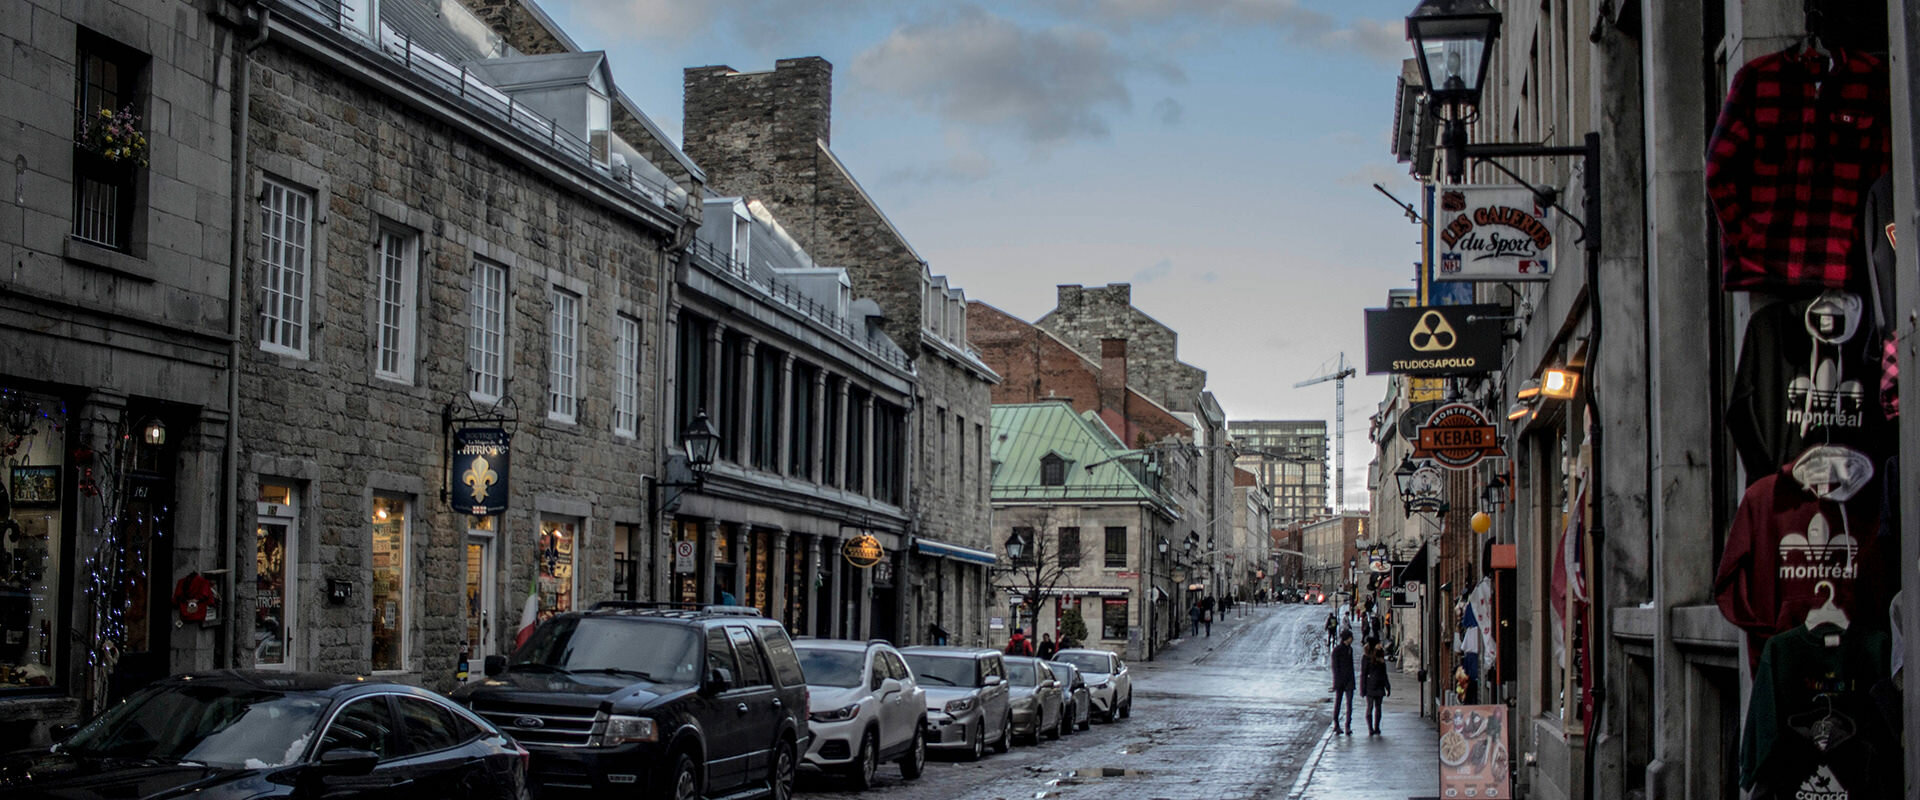 24 free or cheap things to do in Montreal: explore old montreal